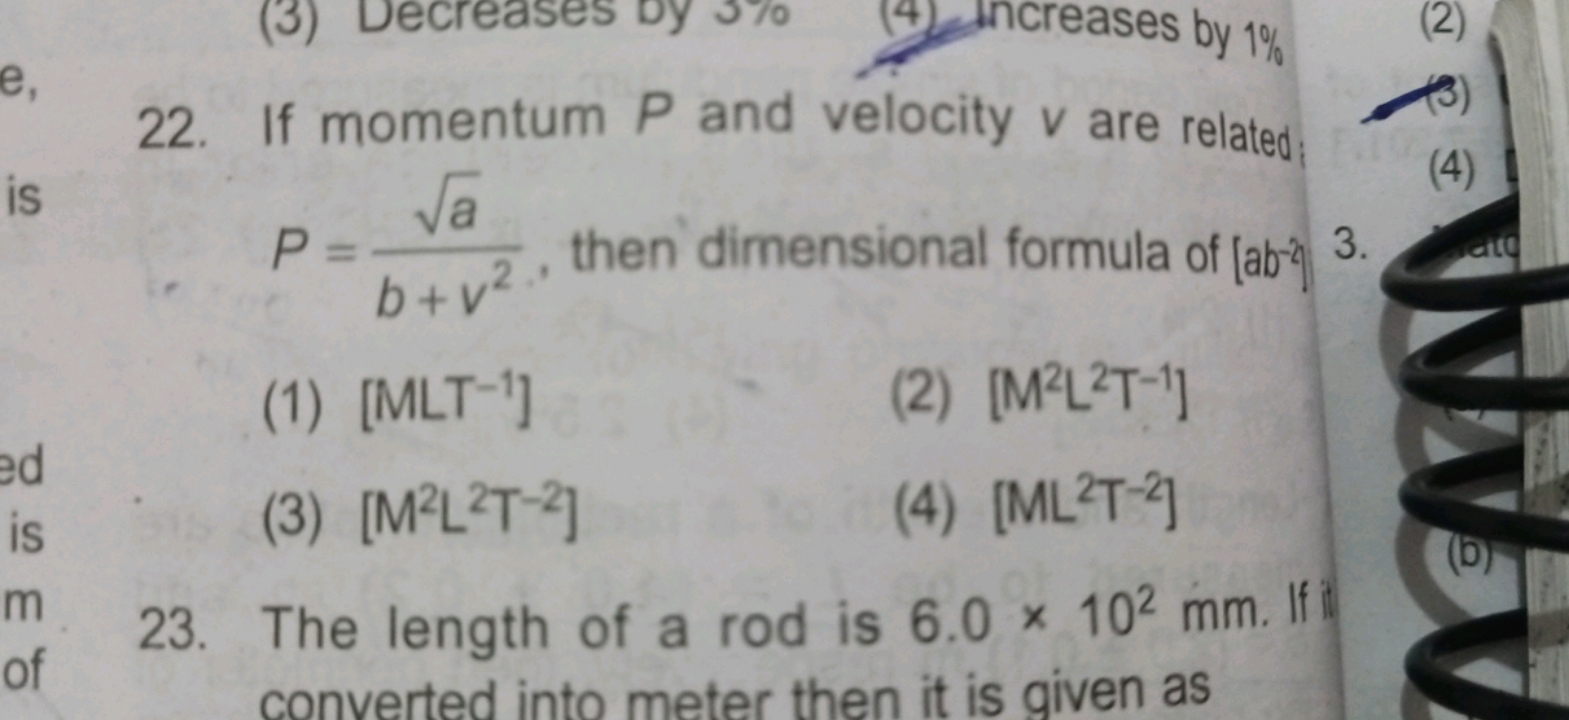 If momentum P and velocity v are related